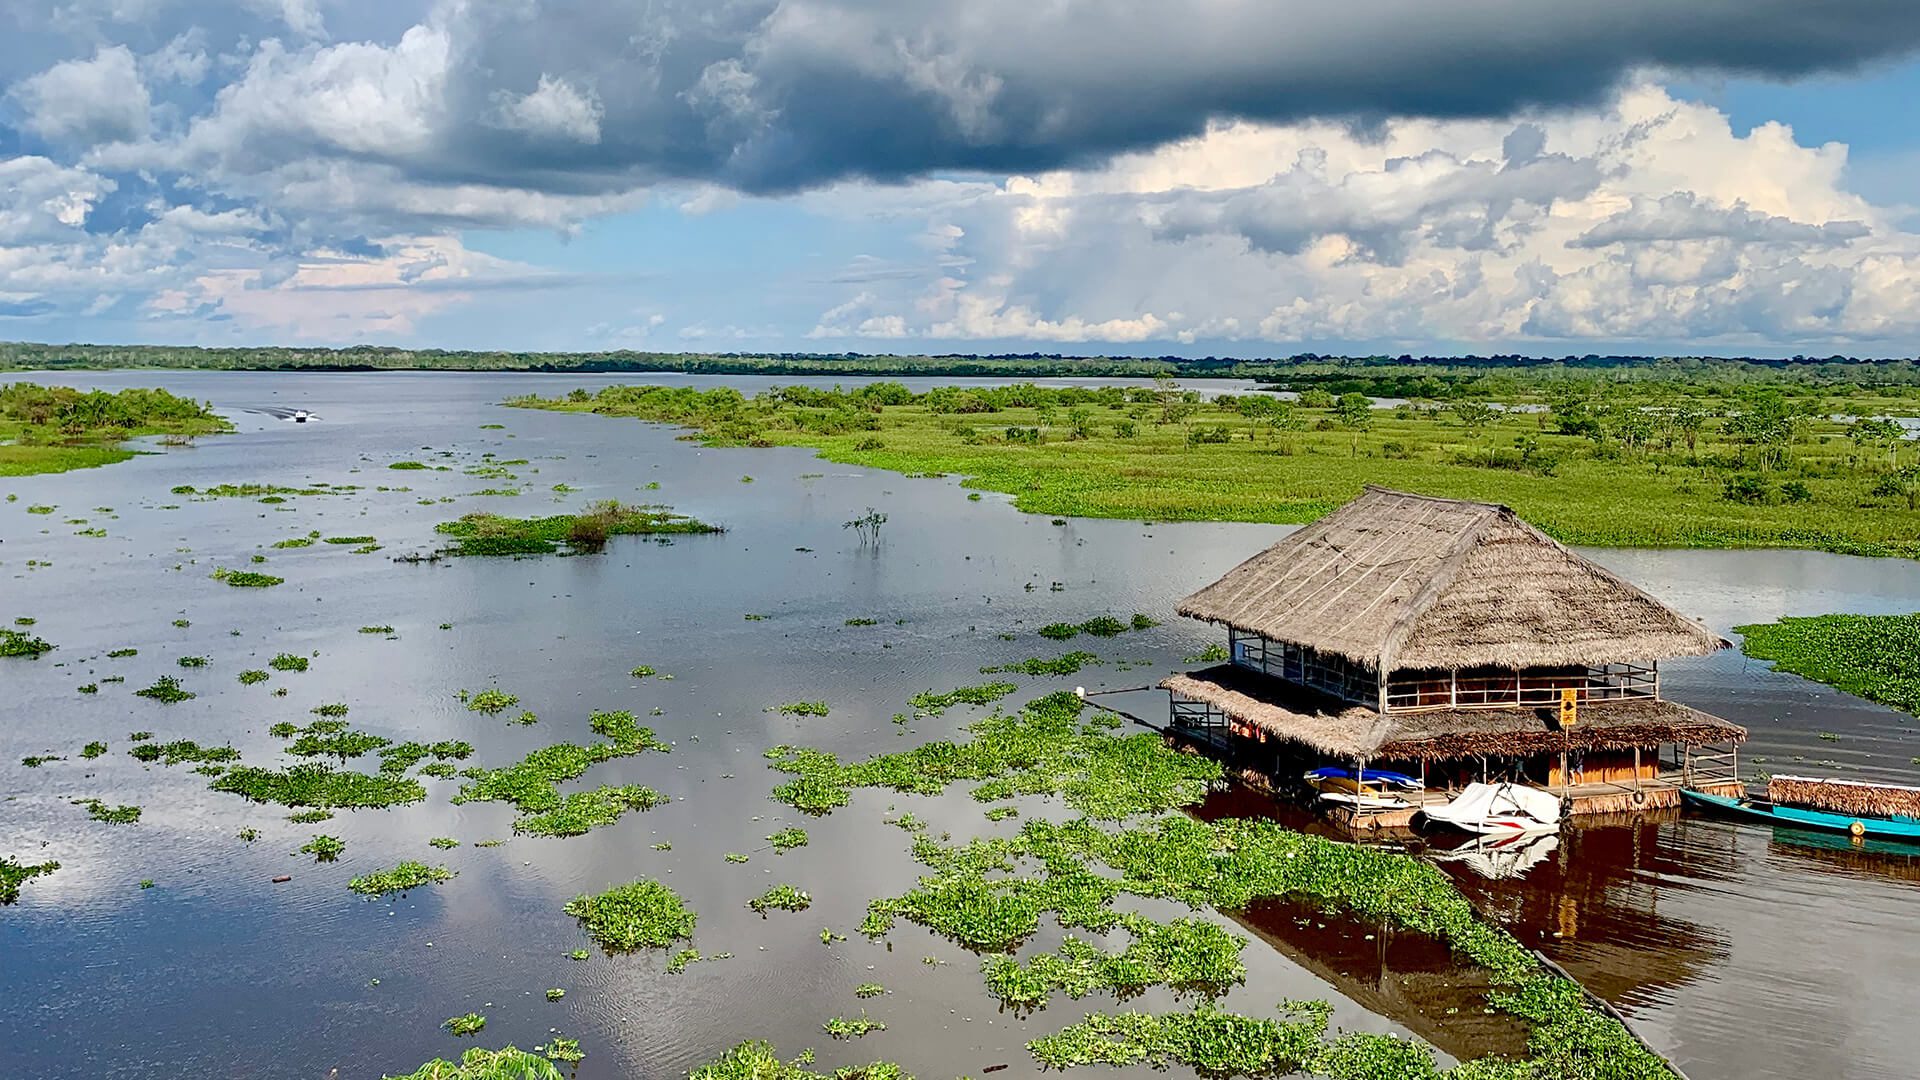 11Iquitos landscape with a stilt house over the river, surrounded by vegetation and powerful clouds